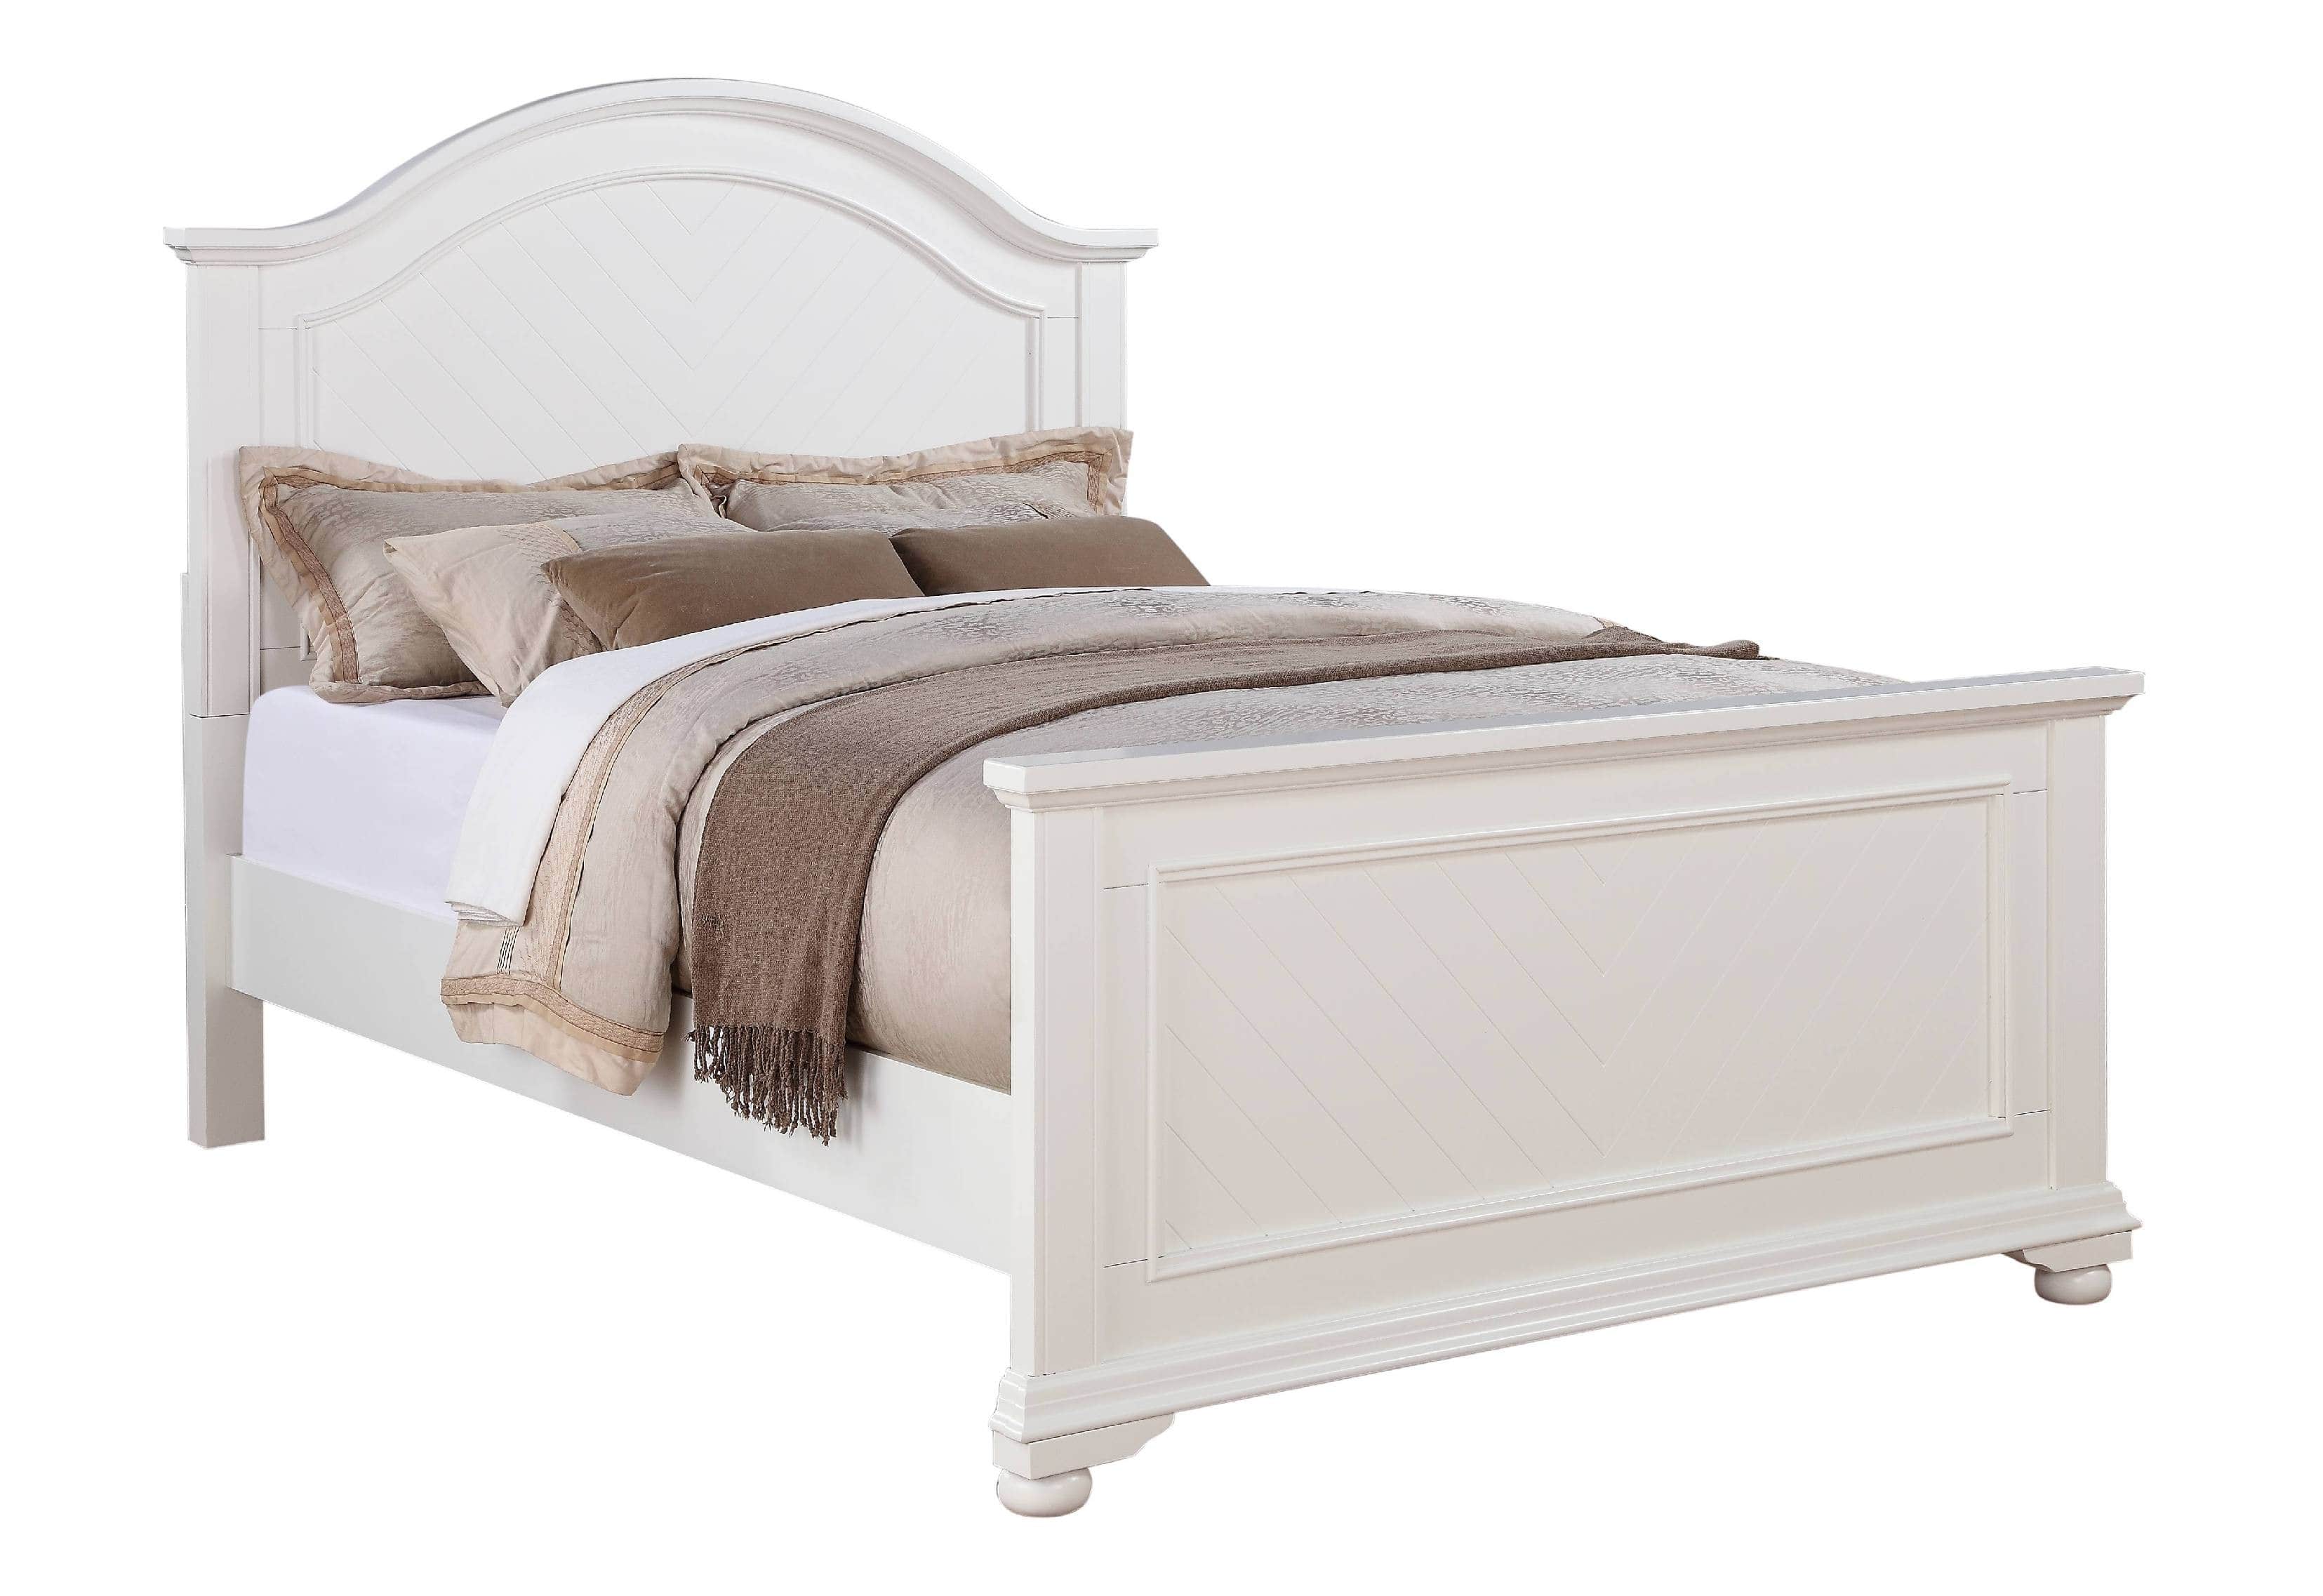 Elements BP700Q Brook White Queen Size Bed - PriceCo Furniture Store